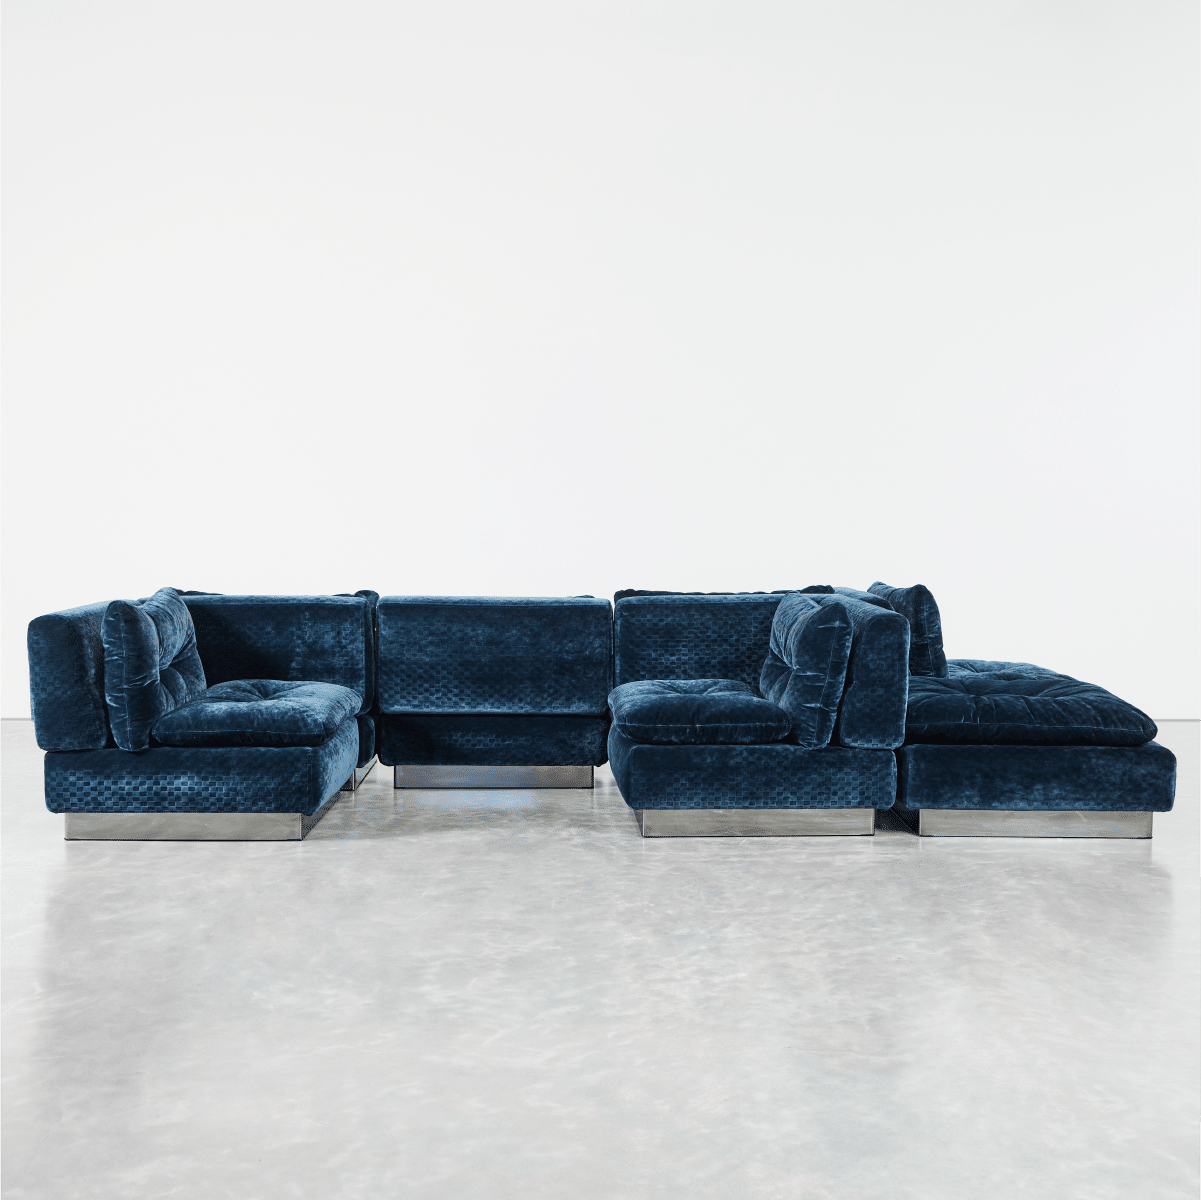 Low res for web_Papa Sectional Sofa